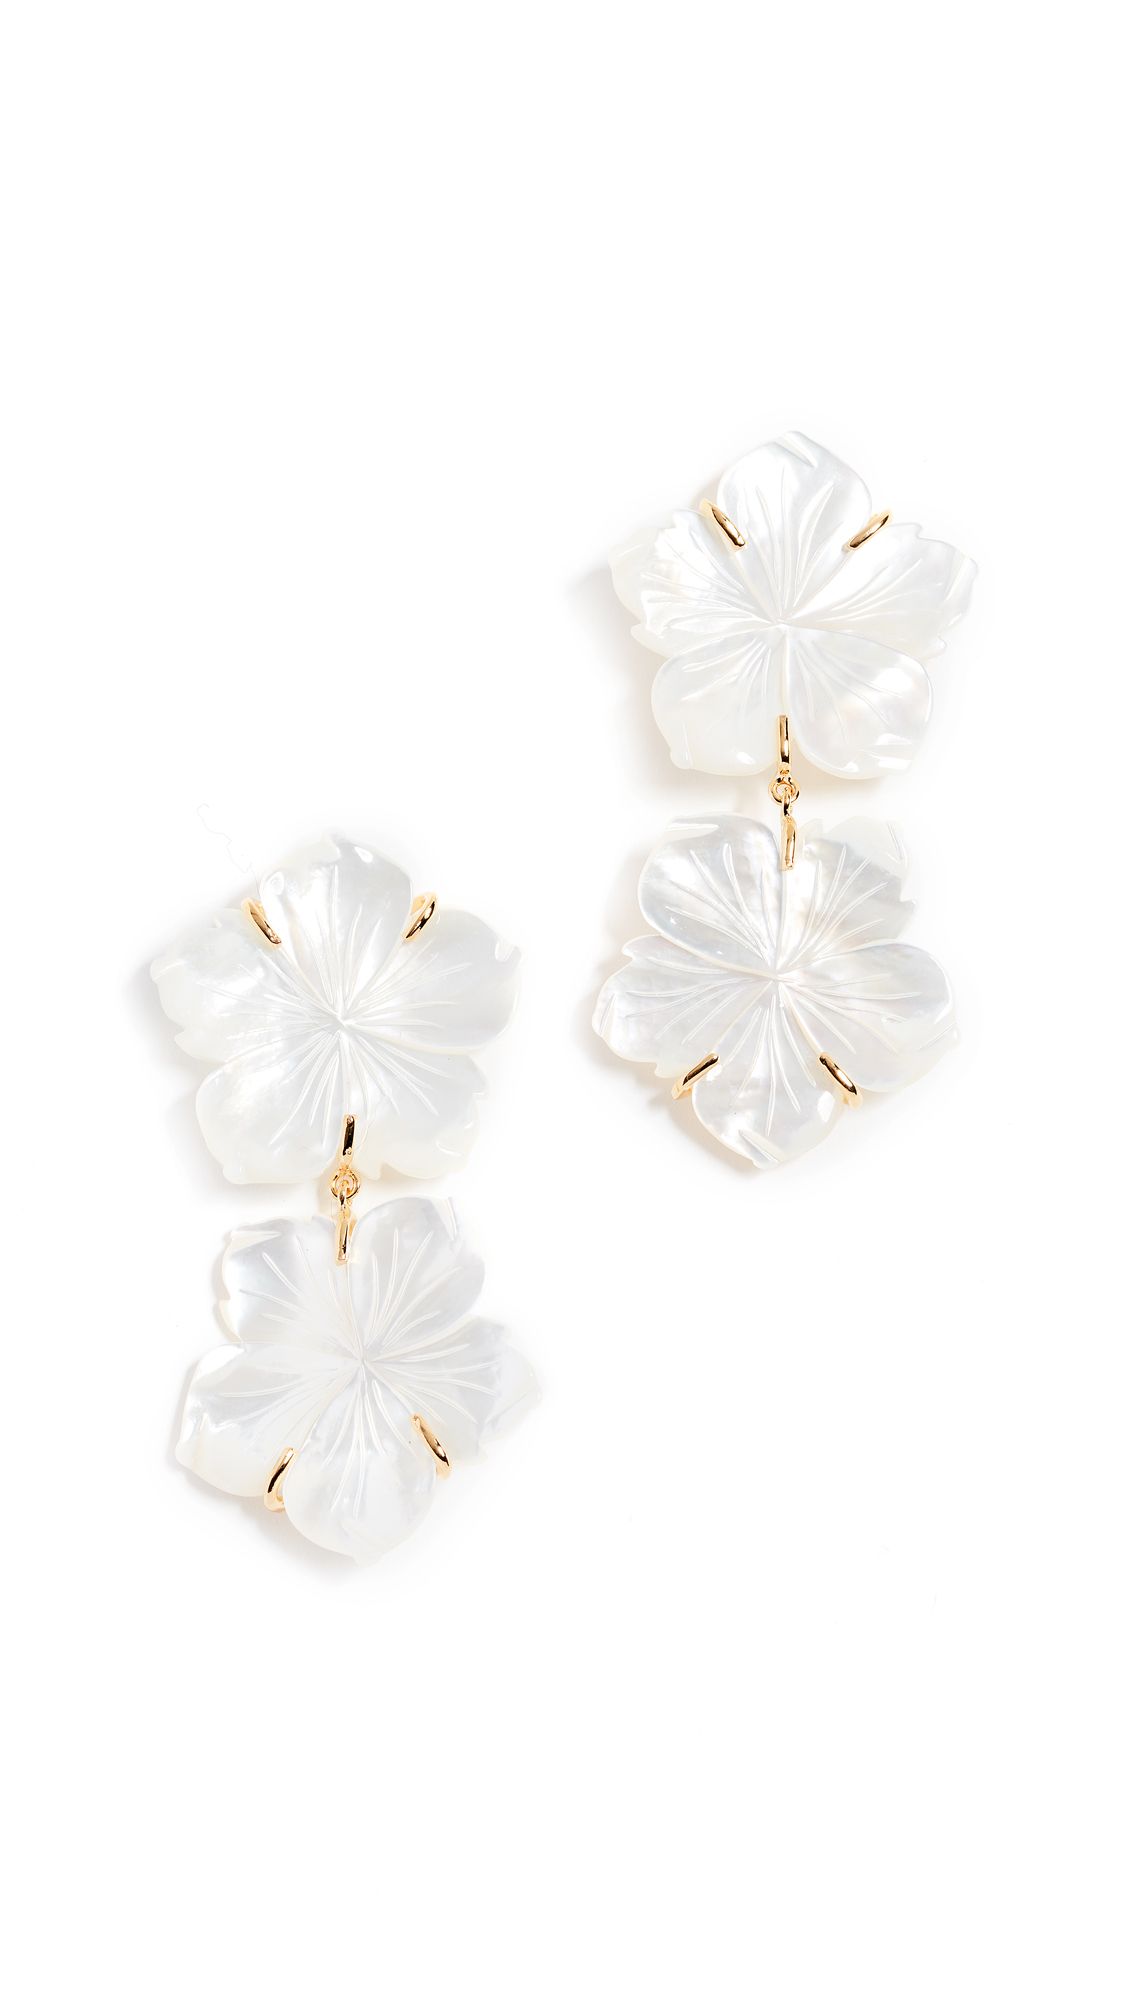 Lizzie Fortunato Paper White Reflection Earrings | Shopbop